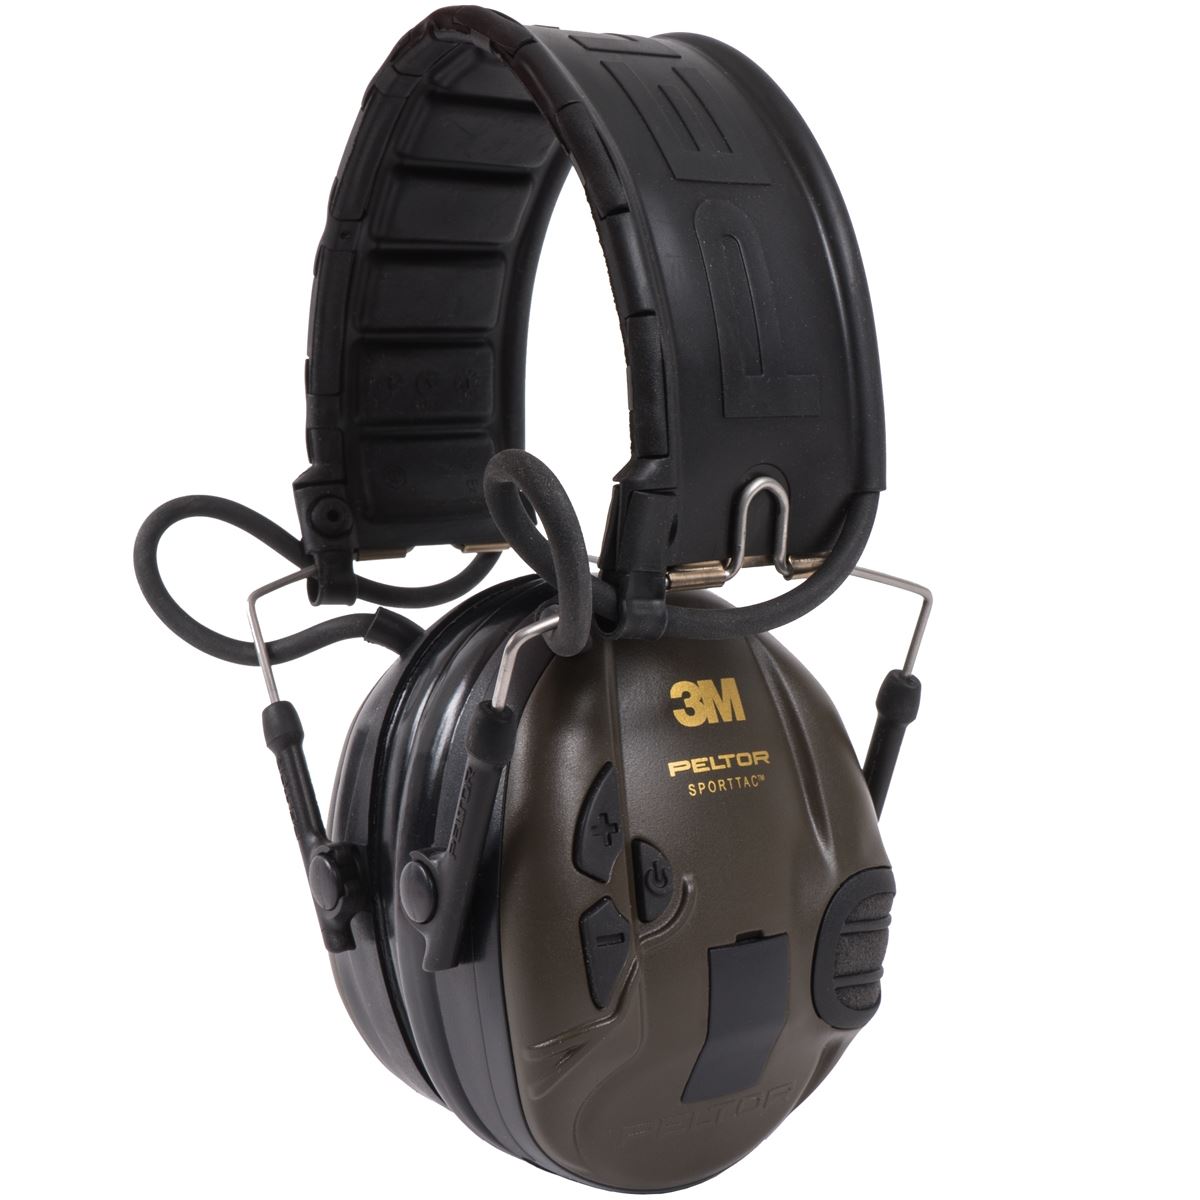 Do Peltor SportTac Ear Defenders hinder normal sound around you, like approaching game?